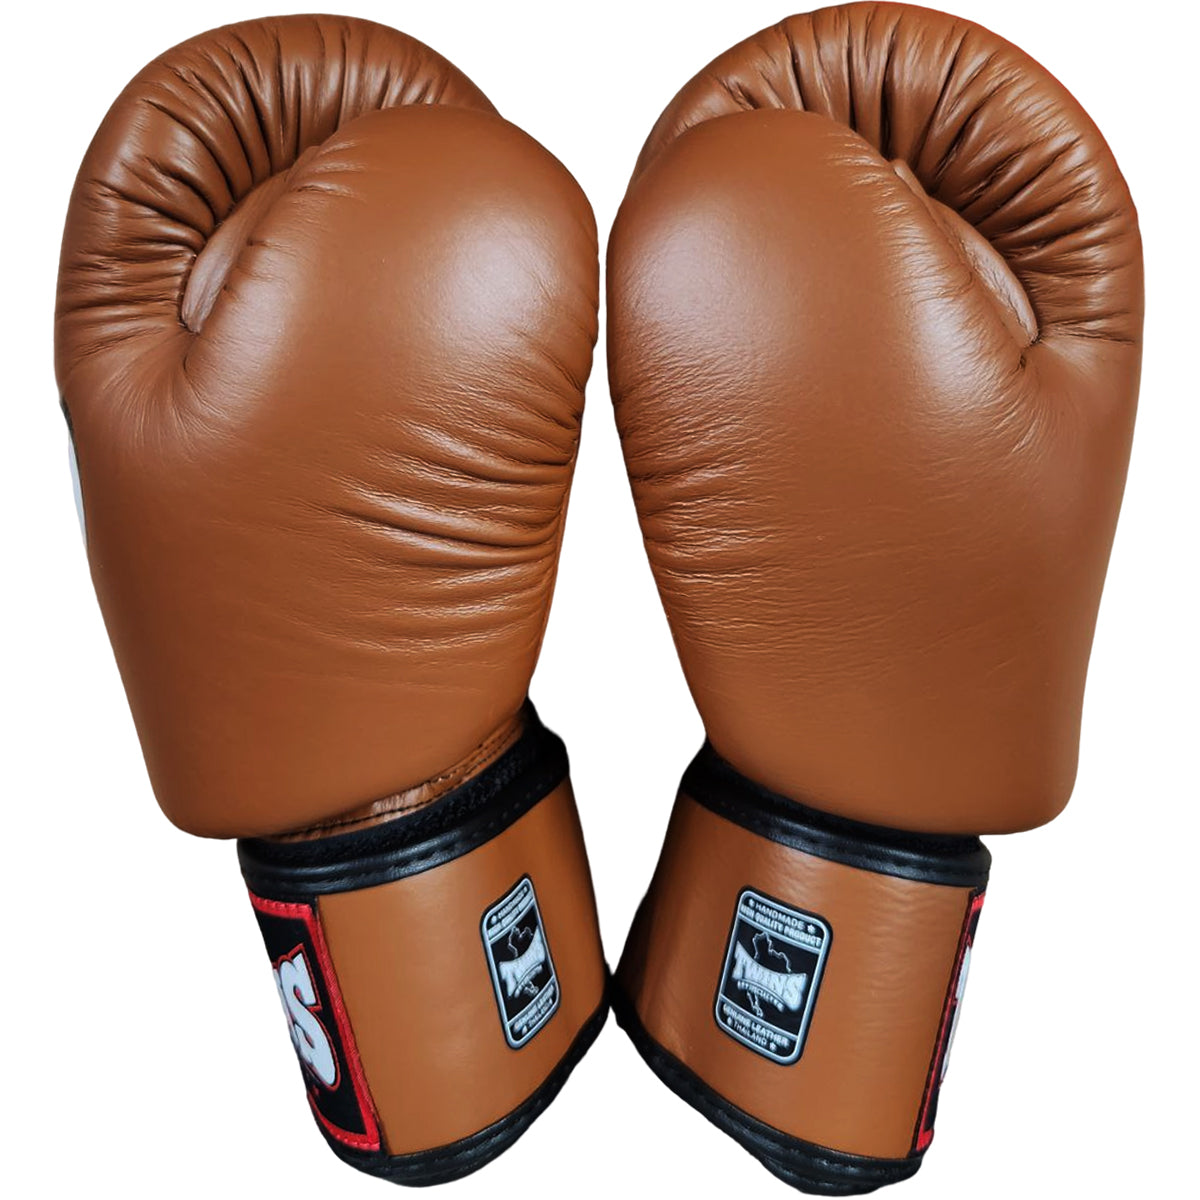 Boxing Gloves Twins Special BGVL3 Brown